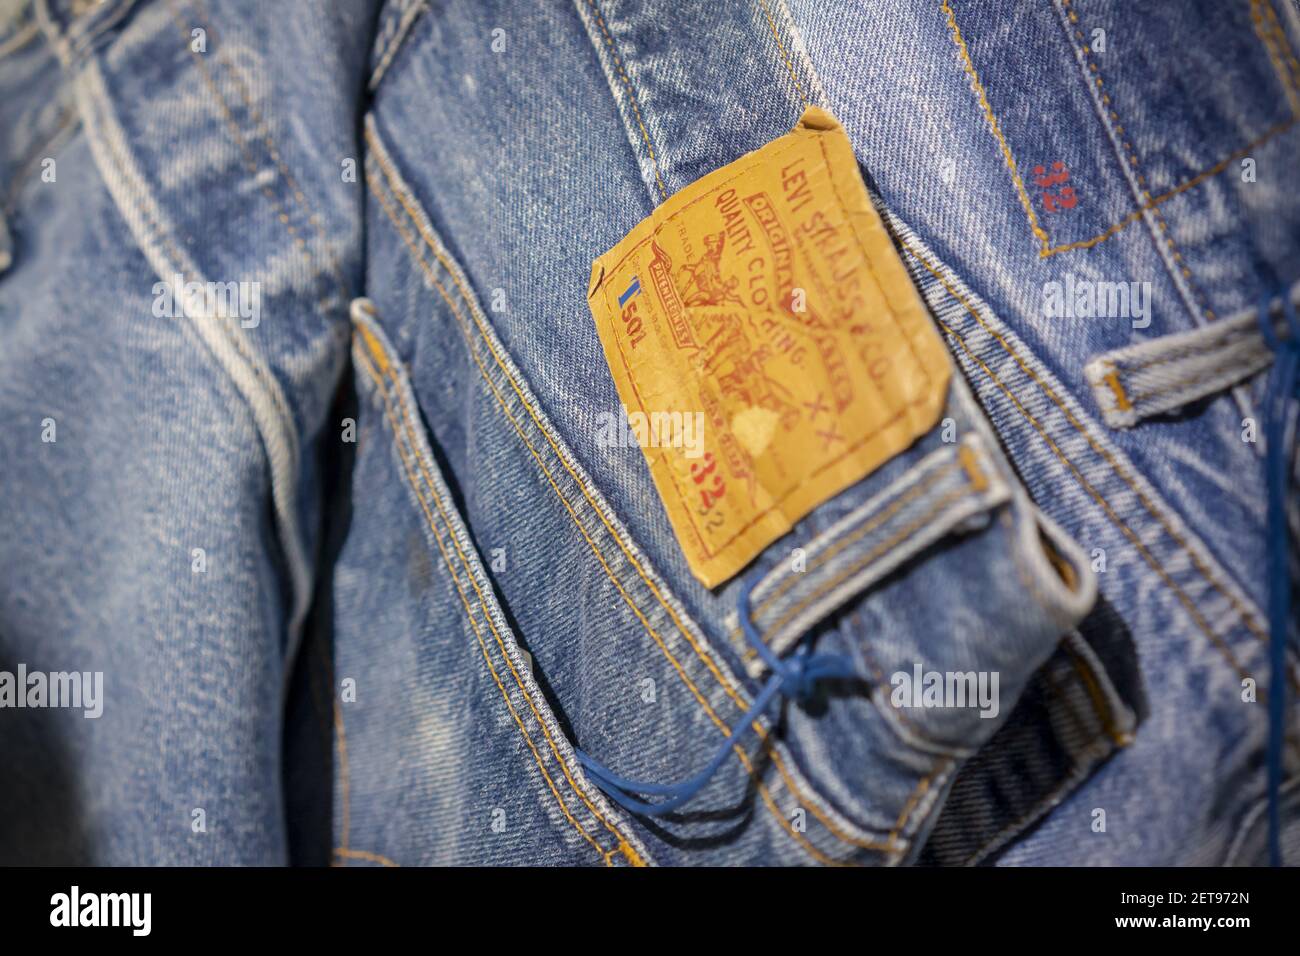 Vintage 501 jeans in the Levi Strauss and Co.'s new flagship store in Times  Square in New York on its grand opening day, Friday, November 16, 2018. Levi  Strauss and Co. is